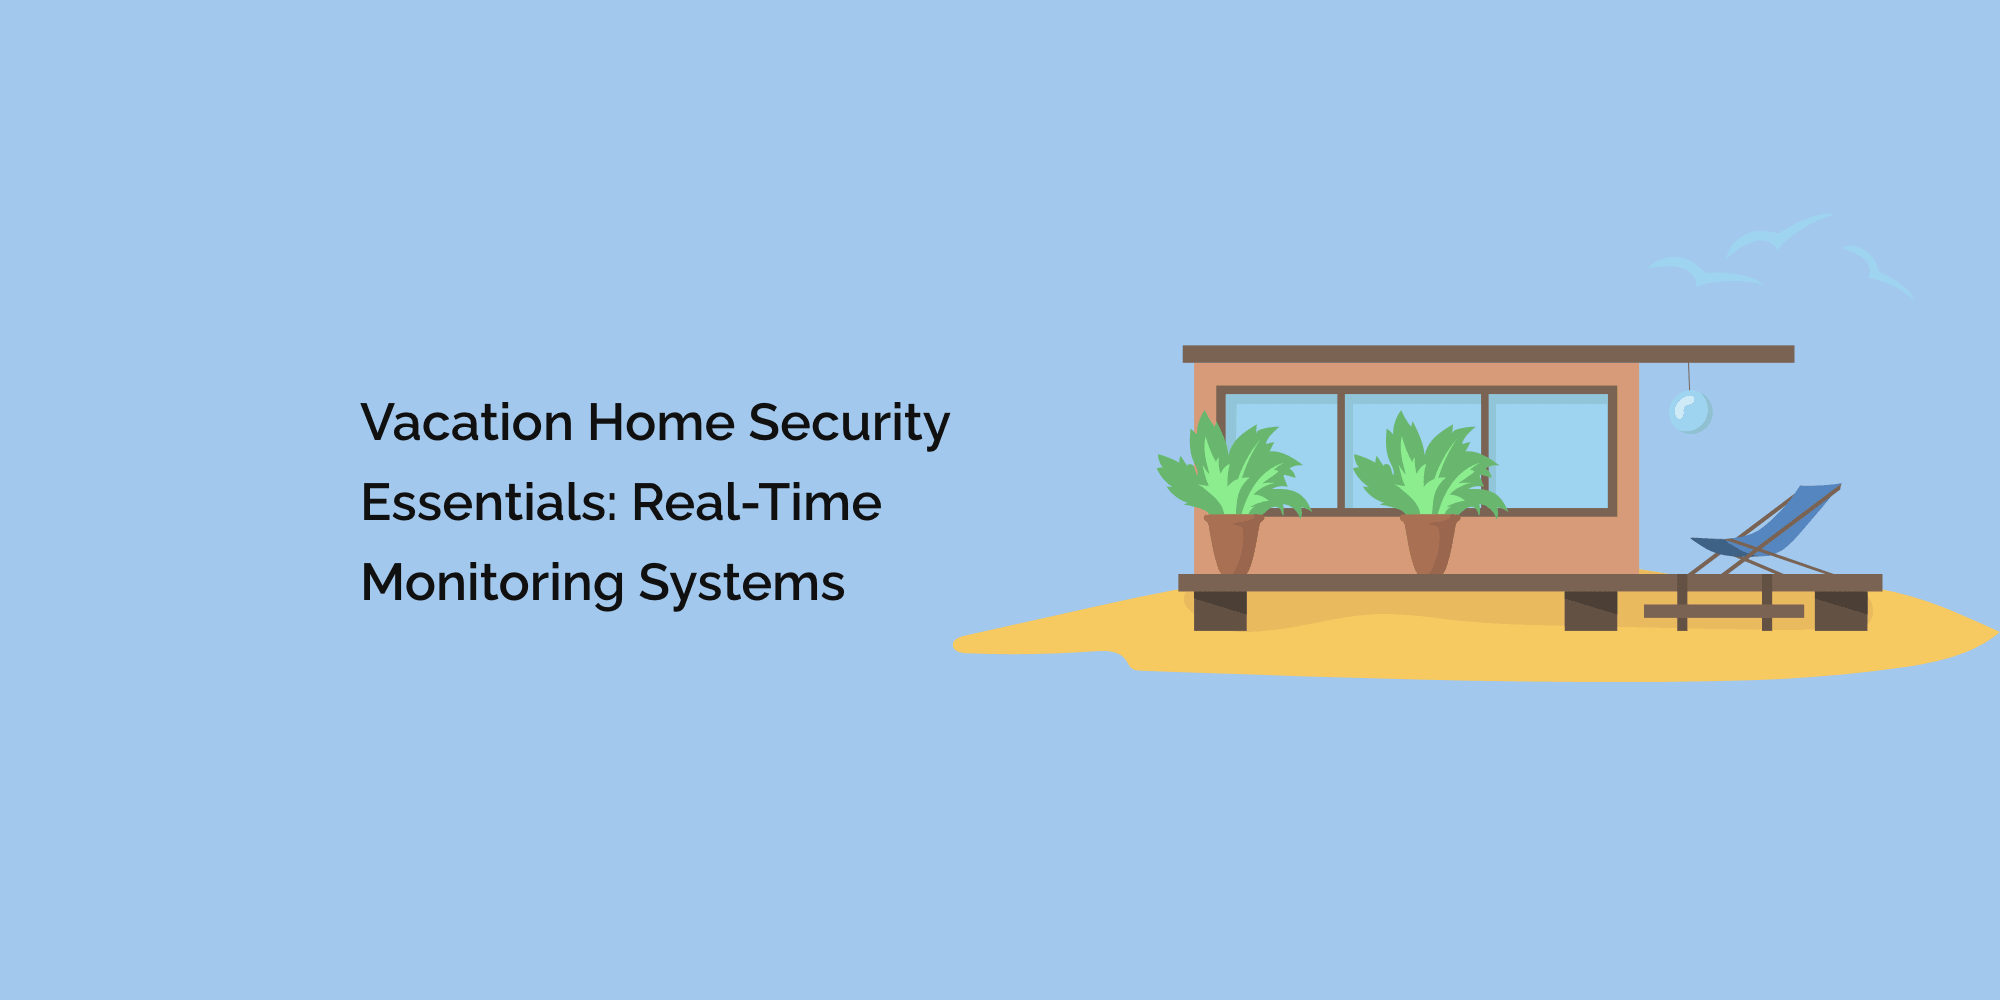 Vacation Home Security Essentials: Real-Time Monitoring Systems